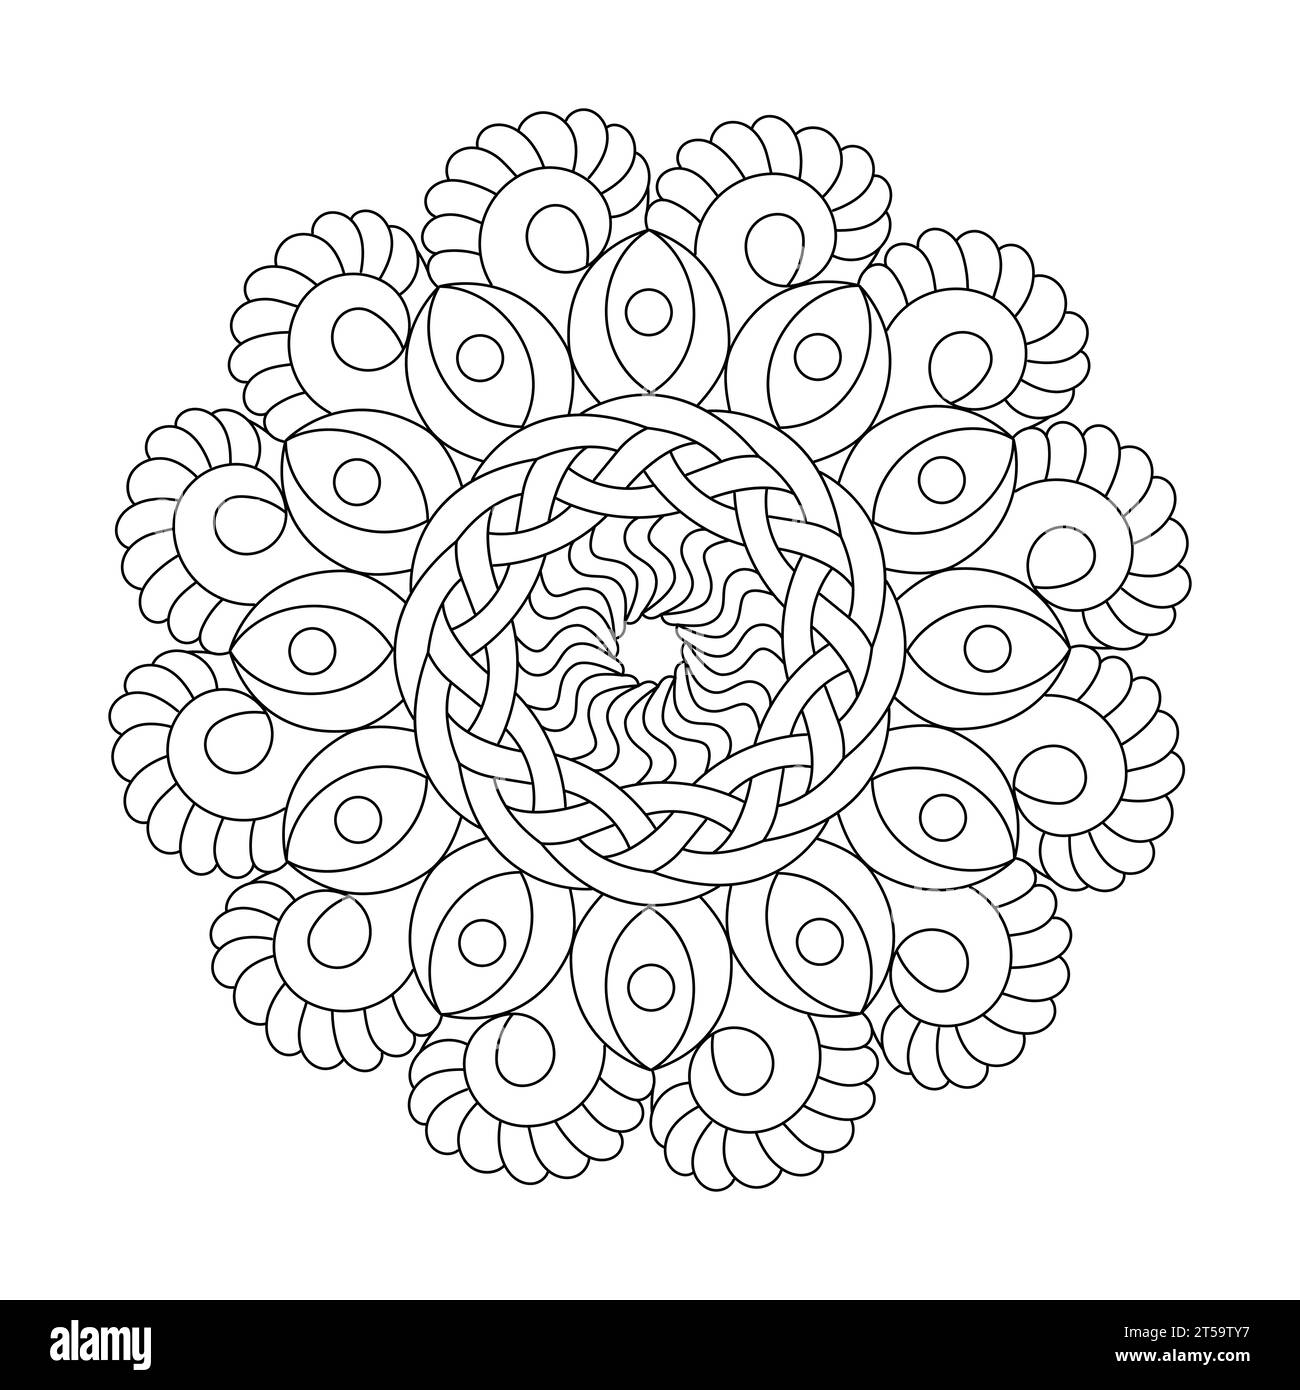 Celtic Mandala Serenity Spiral colouring book page for KDP book interior, Ability to Relax, Brain Experiences, Harmonious Haven, Peaceful Portraits, Bl Stock Vector